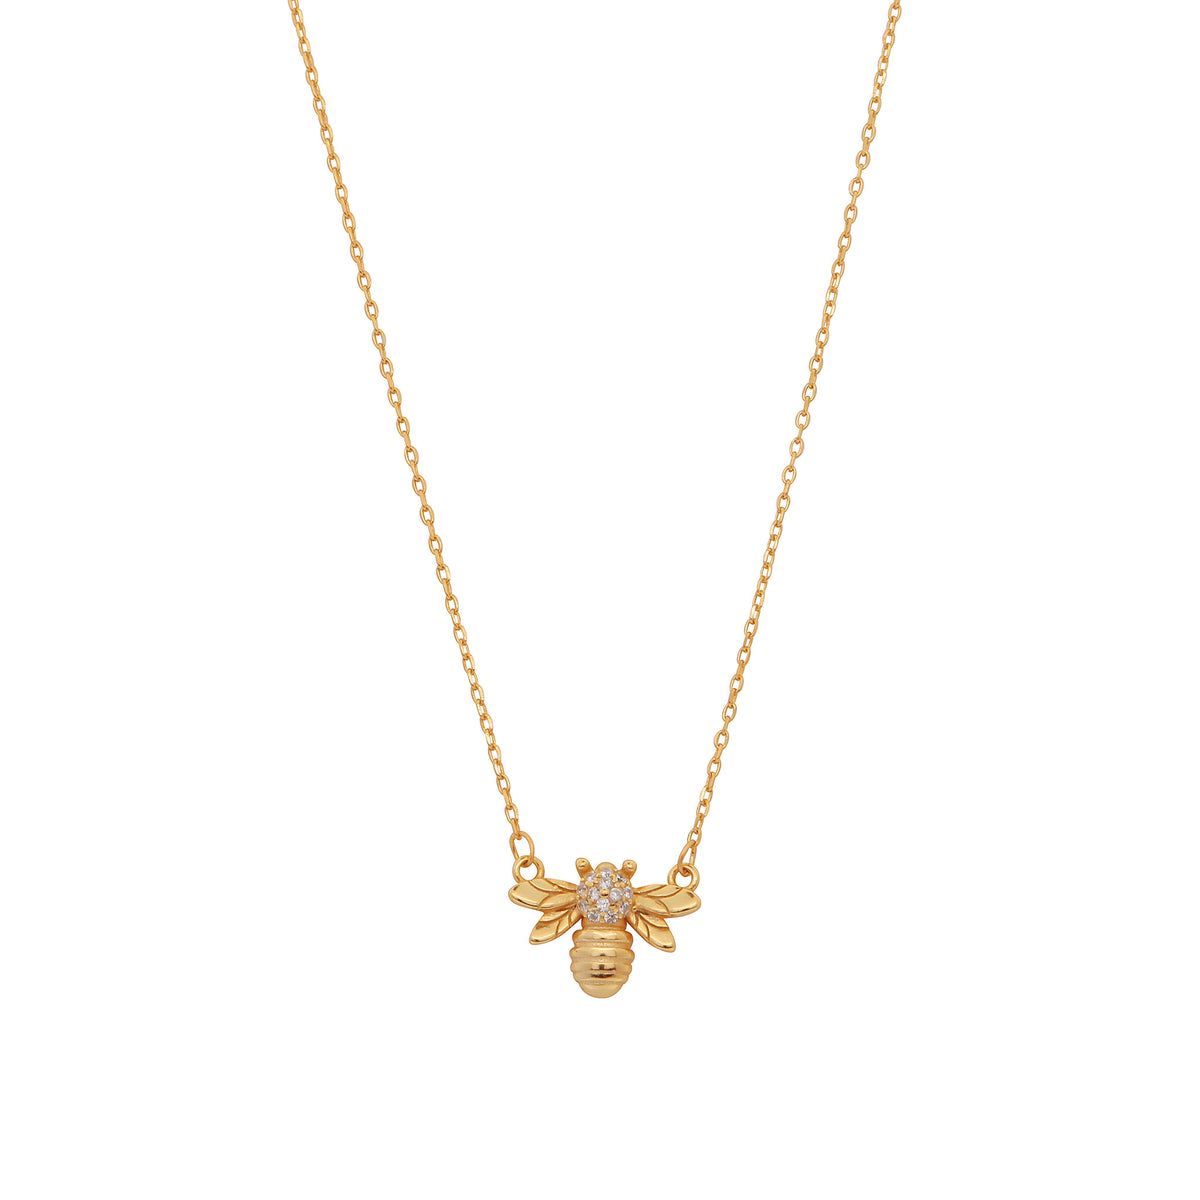 QUEEN BEE PENDANT NECKLACE– House of Pascal